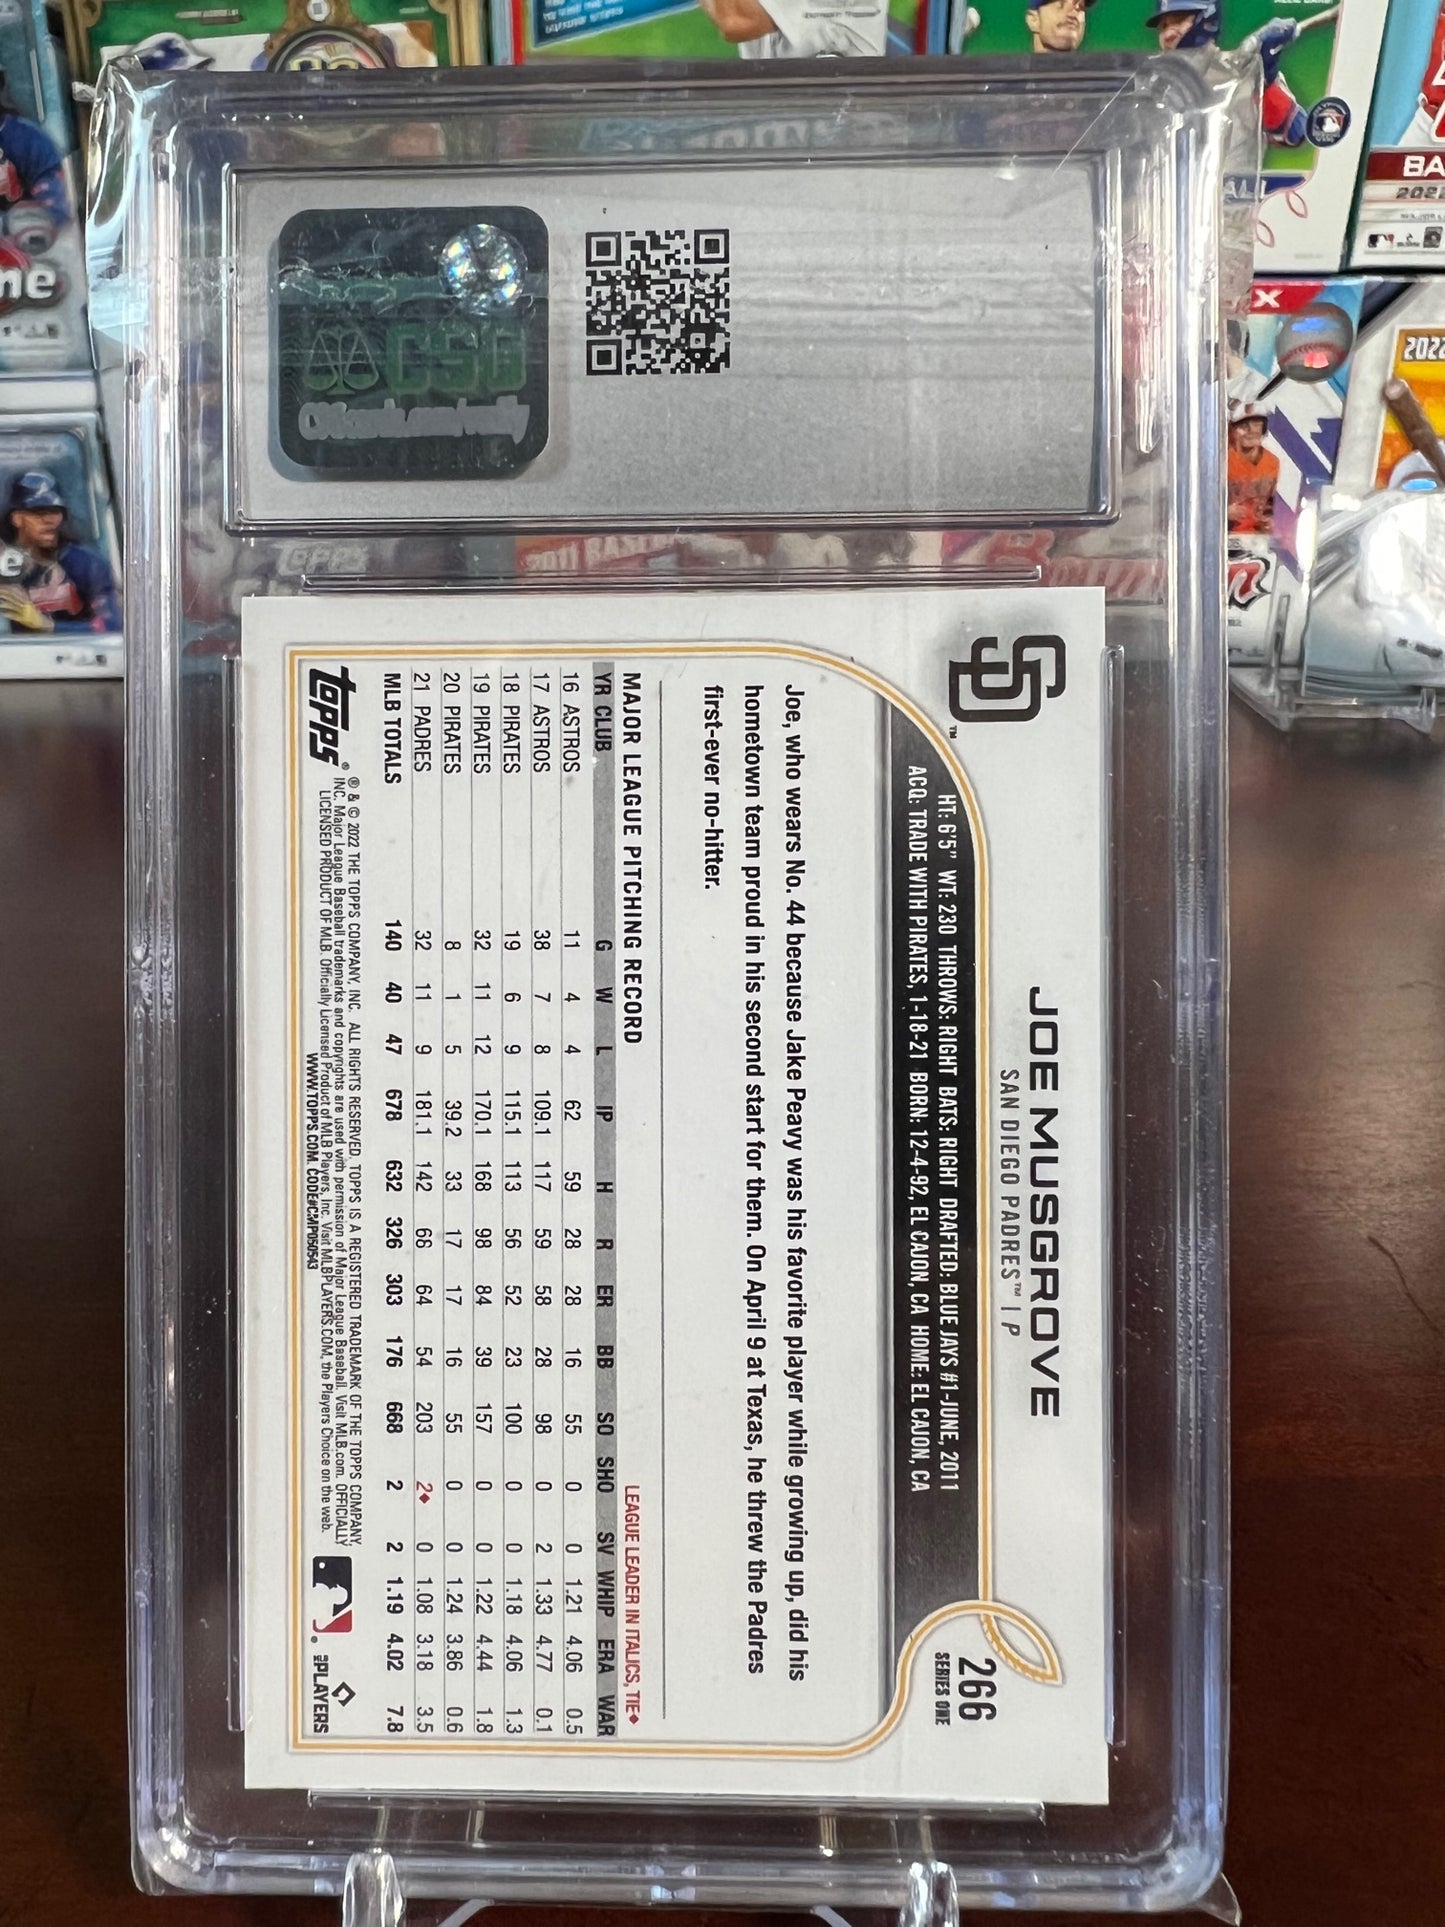 Joe Musgrove - San Diego Padres - 2022 Topps from the 42nd NSCC - Atlantic City - Graded CSG 10